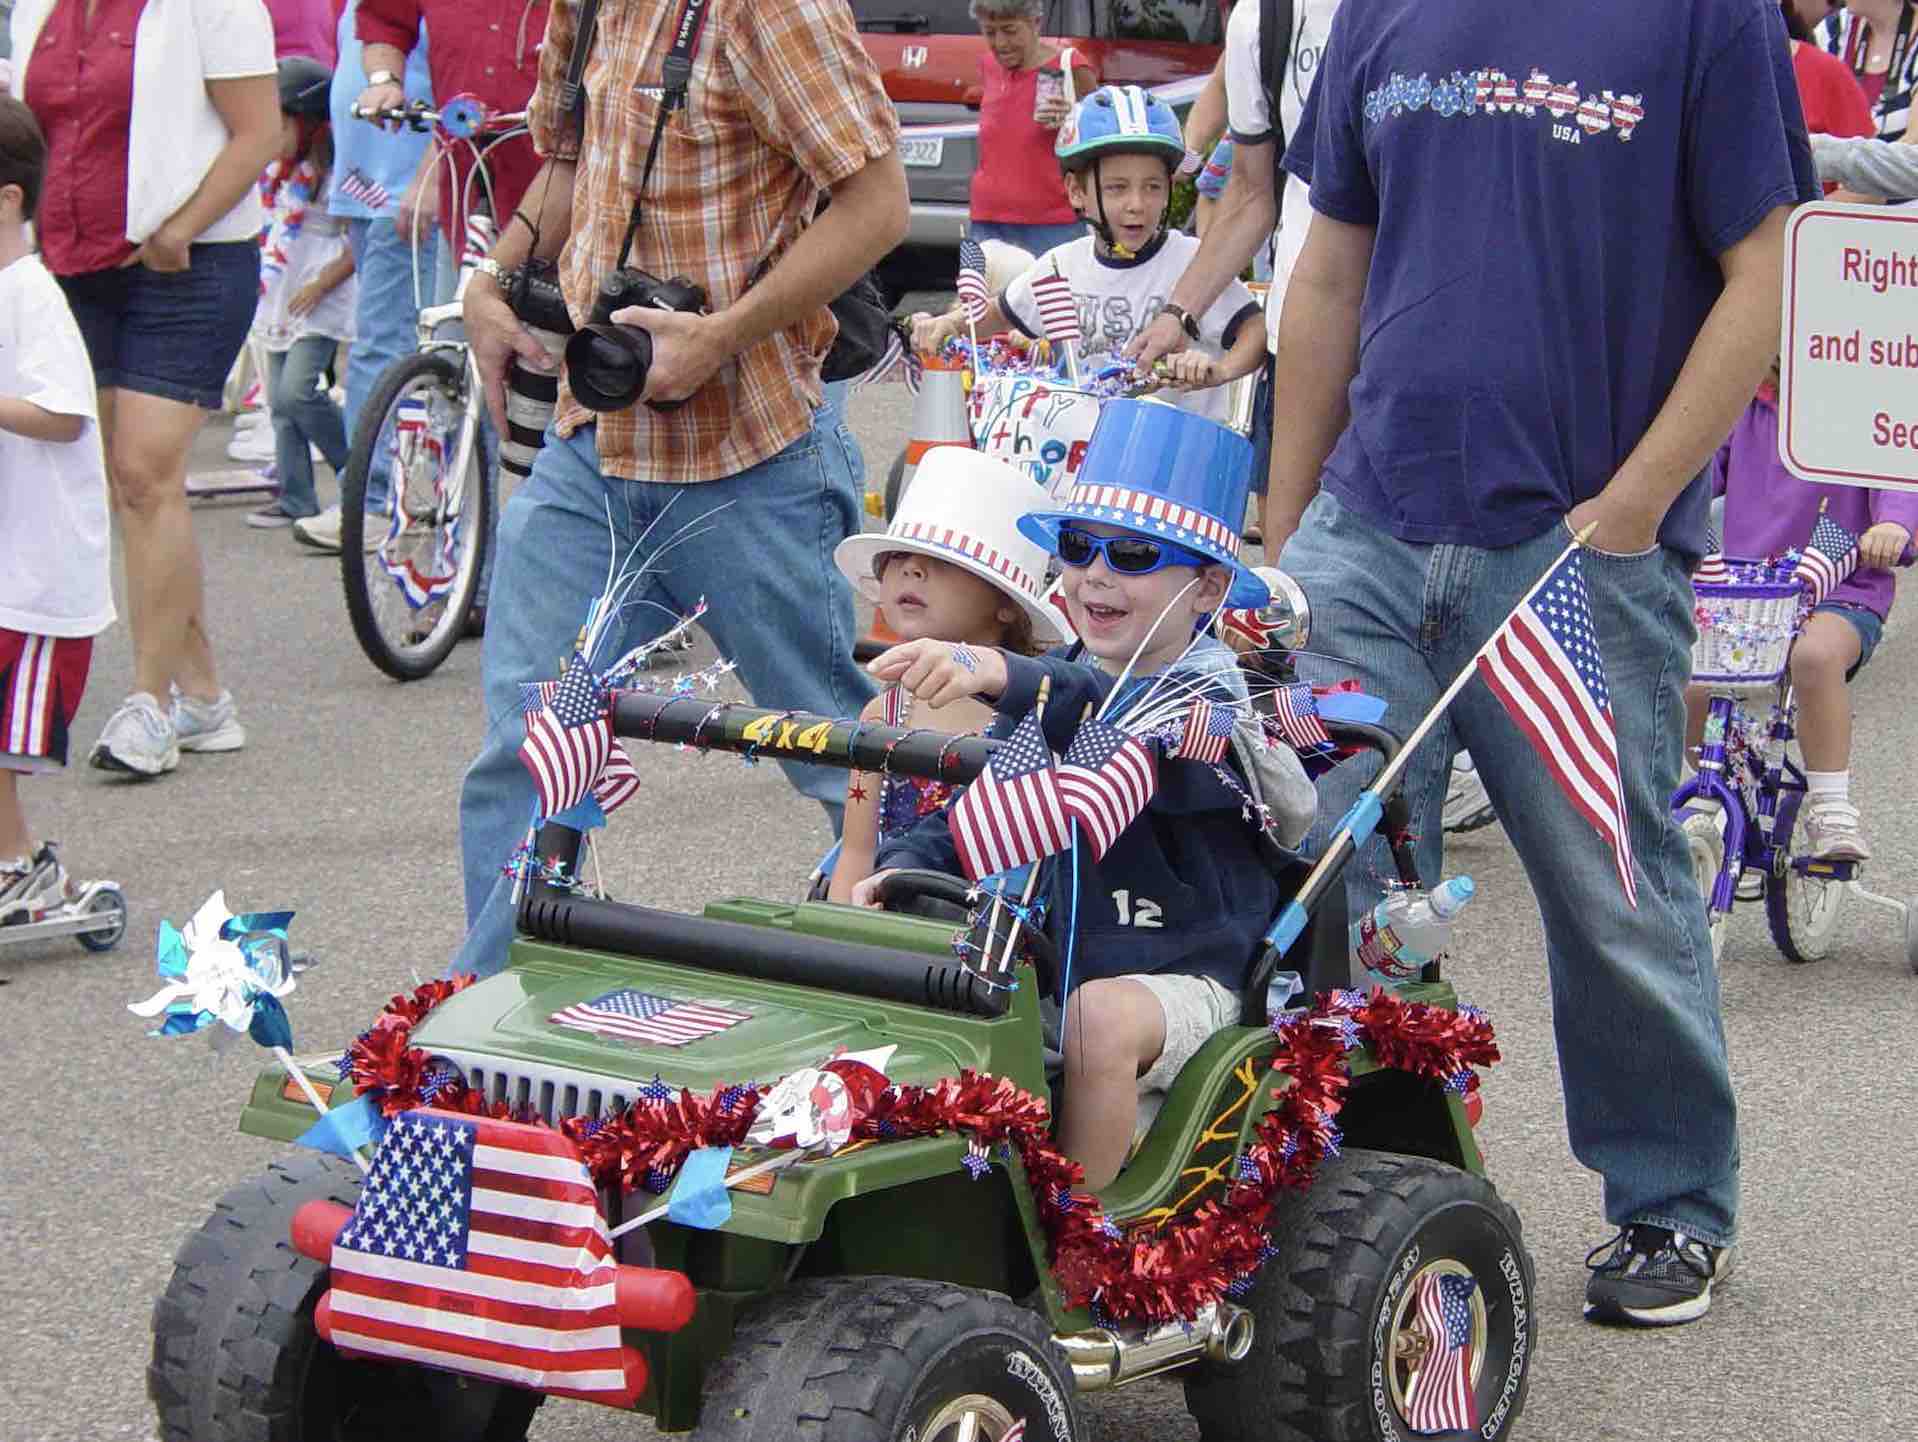 City of Westlake Village - enjoying the July 4 celebrations is one of the top things to do in Westlake Village